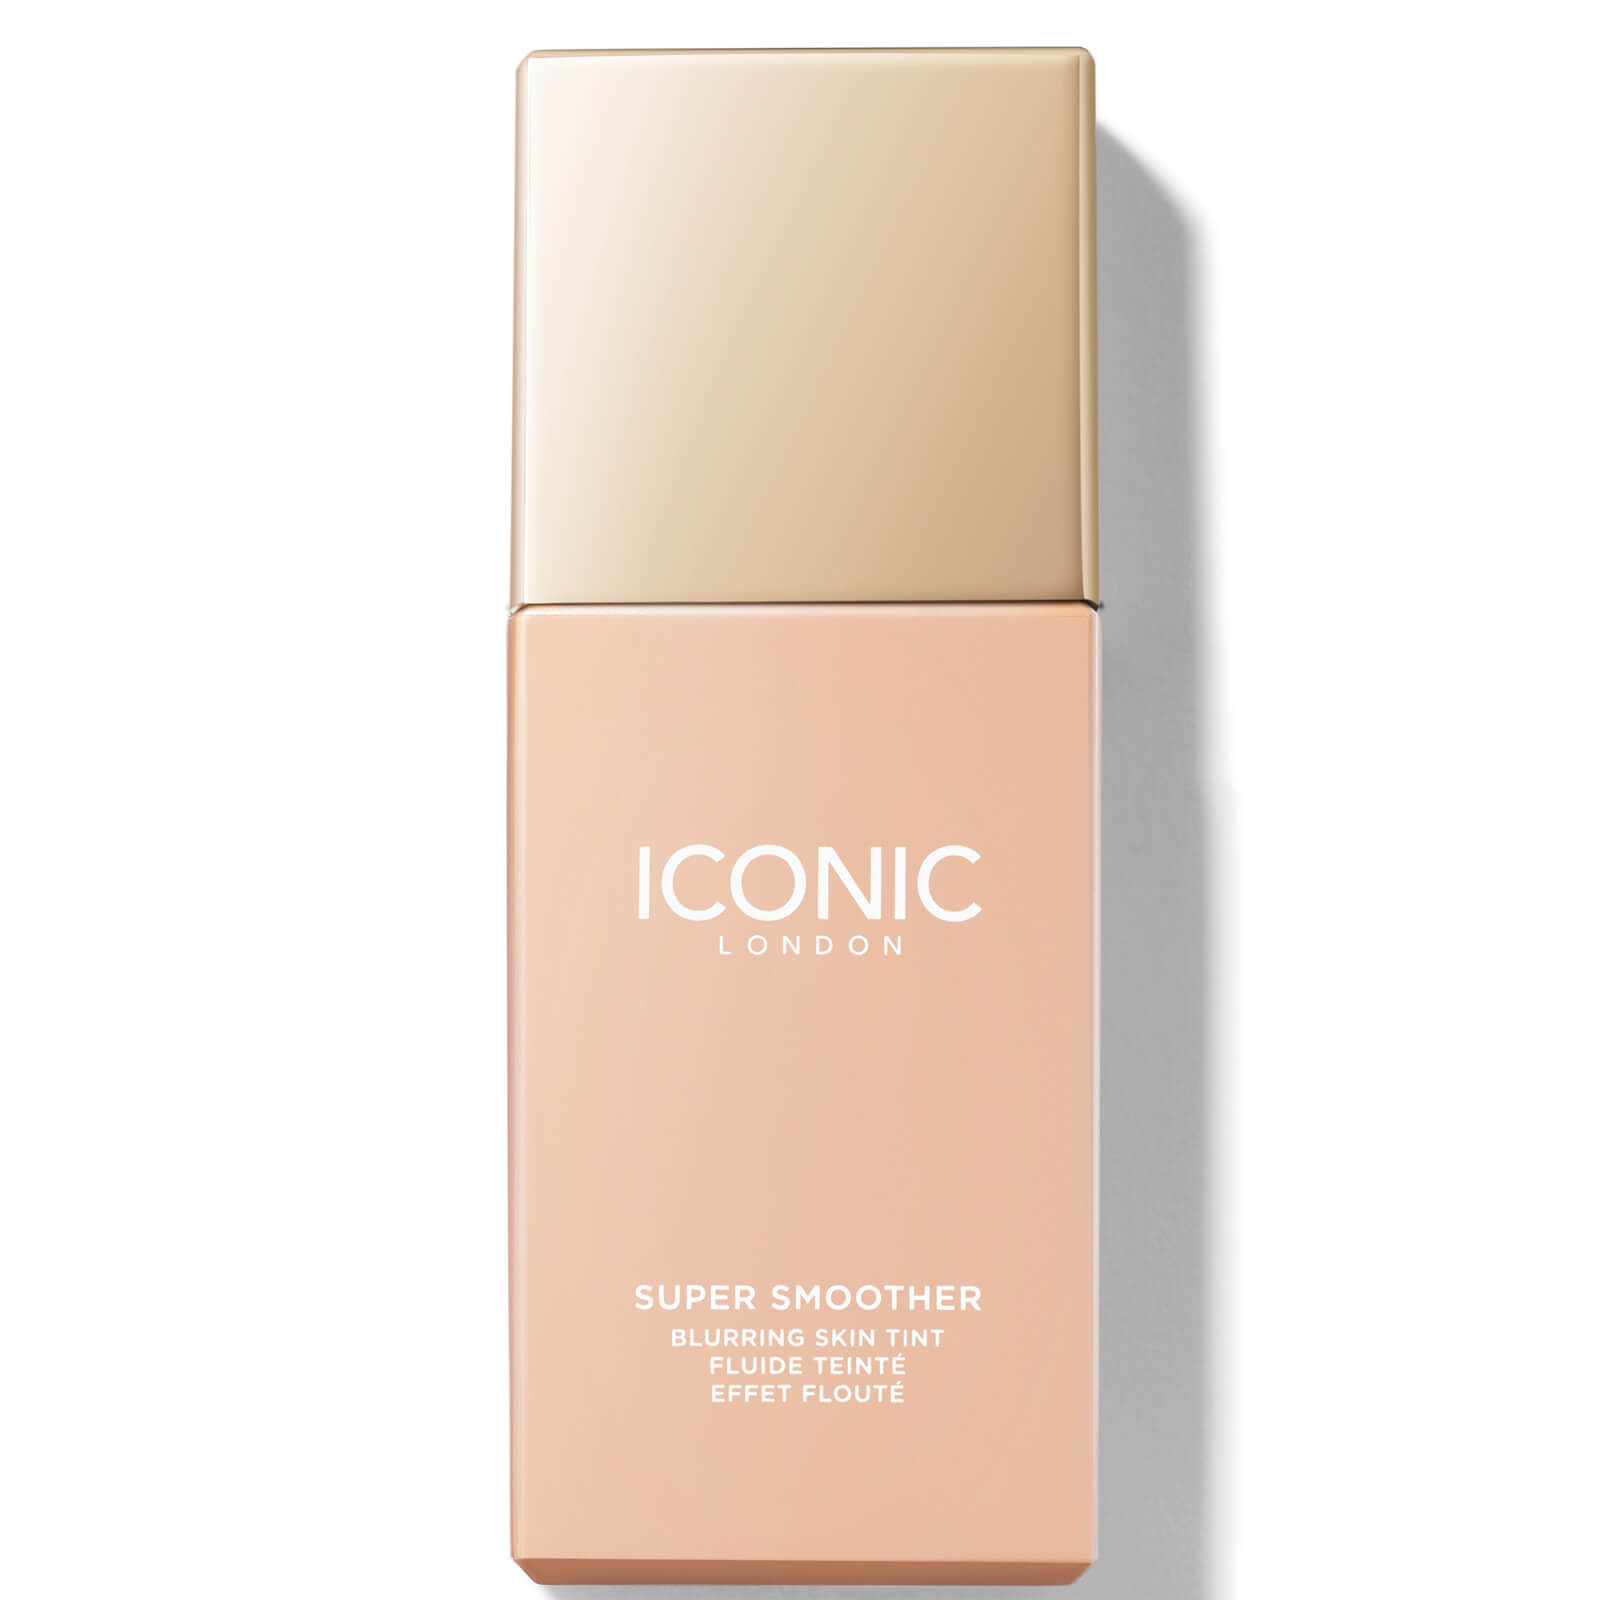 ICONIC London Super Smoother Blurring Skin Tint 30ml (Various Shades) - Cool Fair